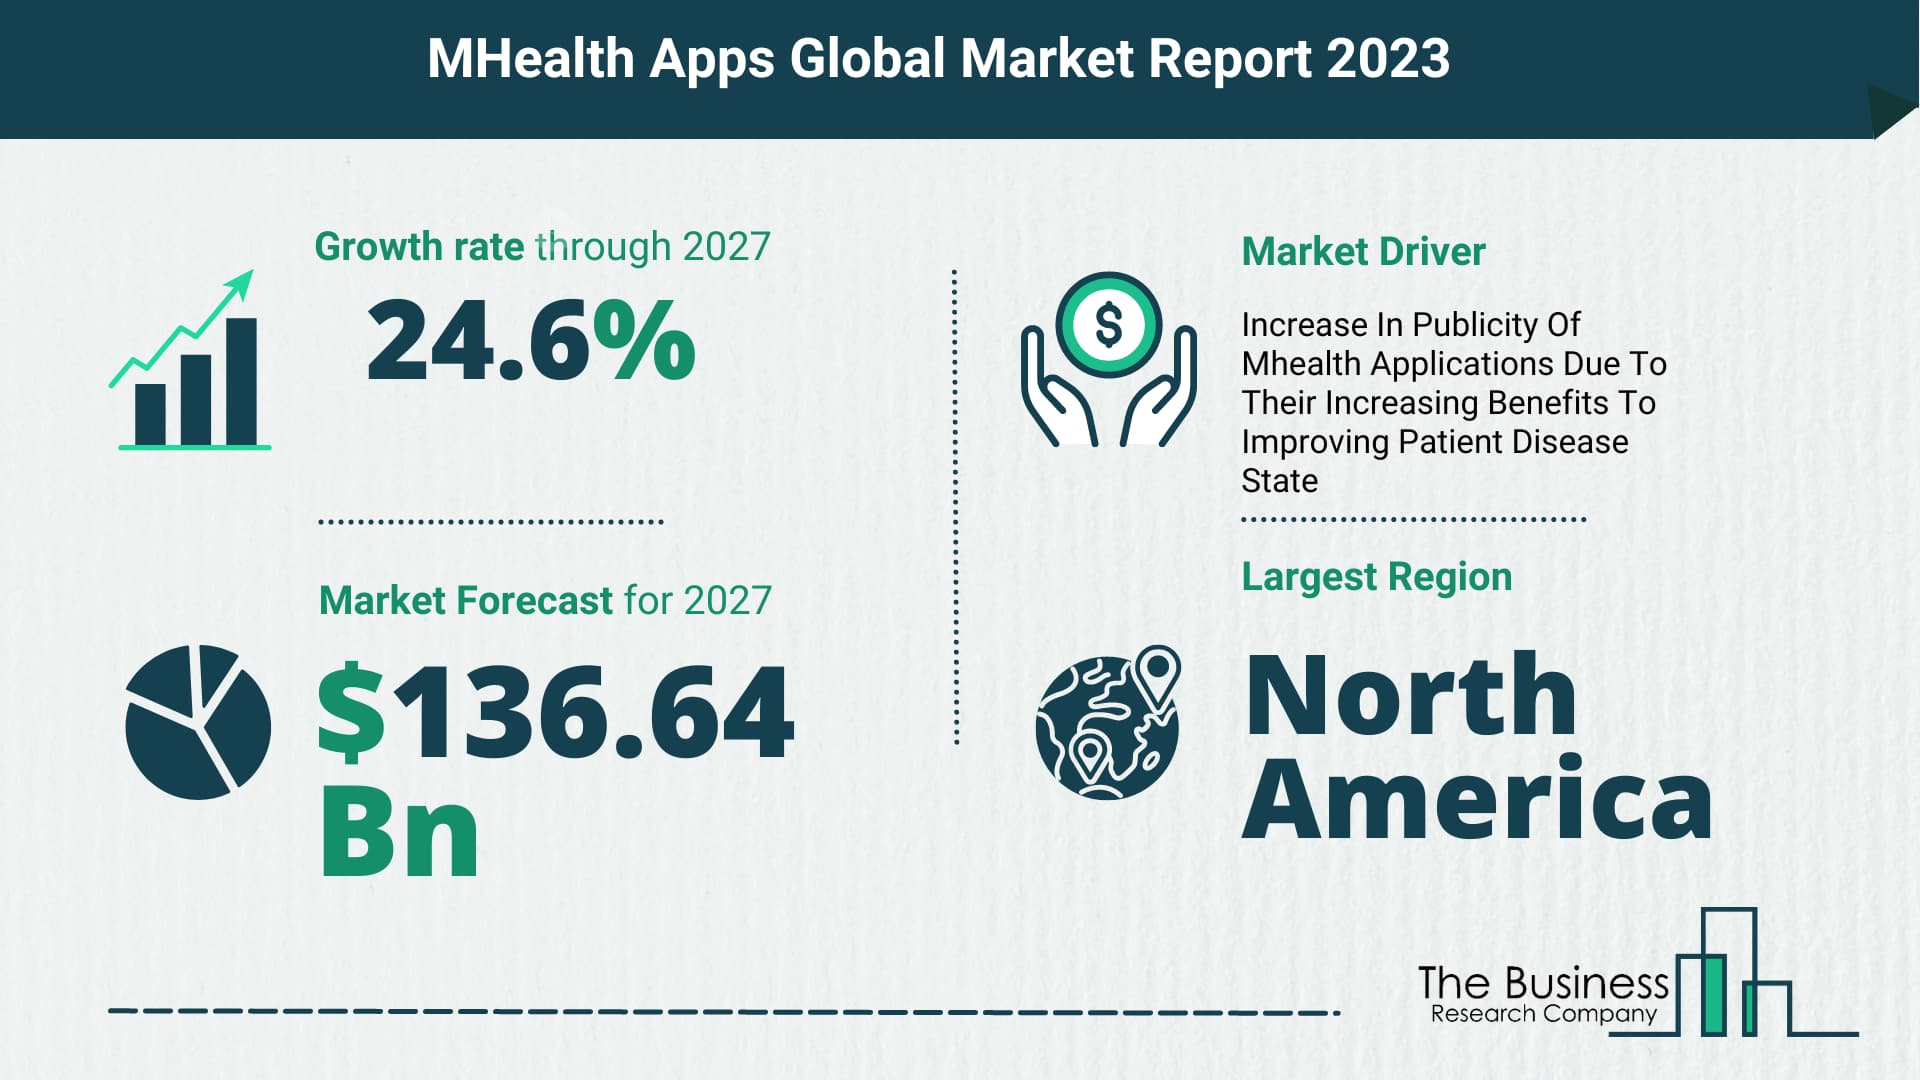 What Will The MHealth Apps Market Look Like In 2023?